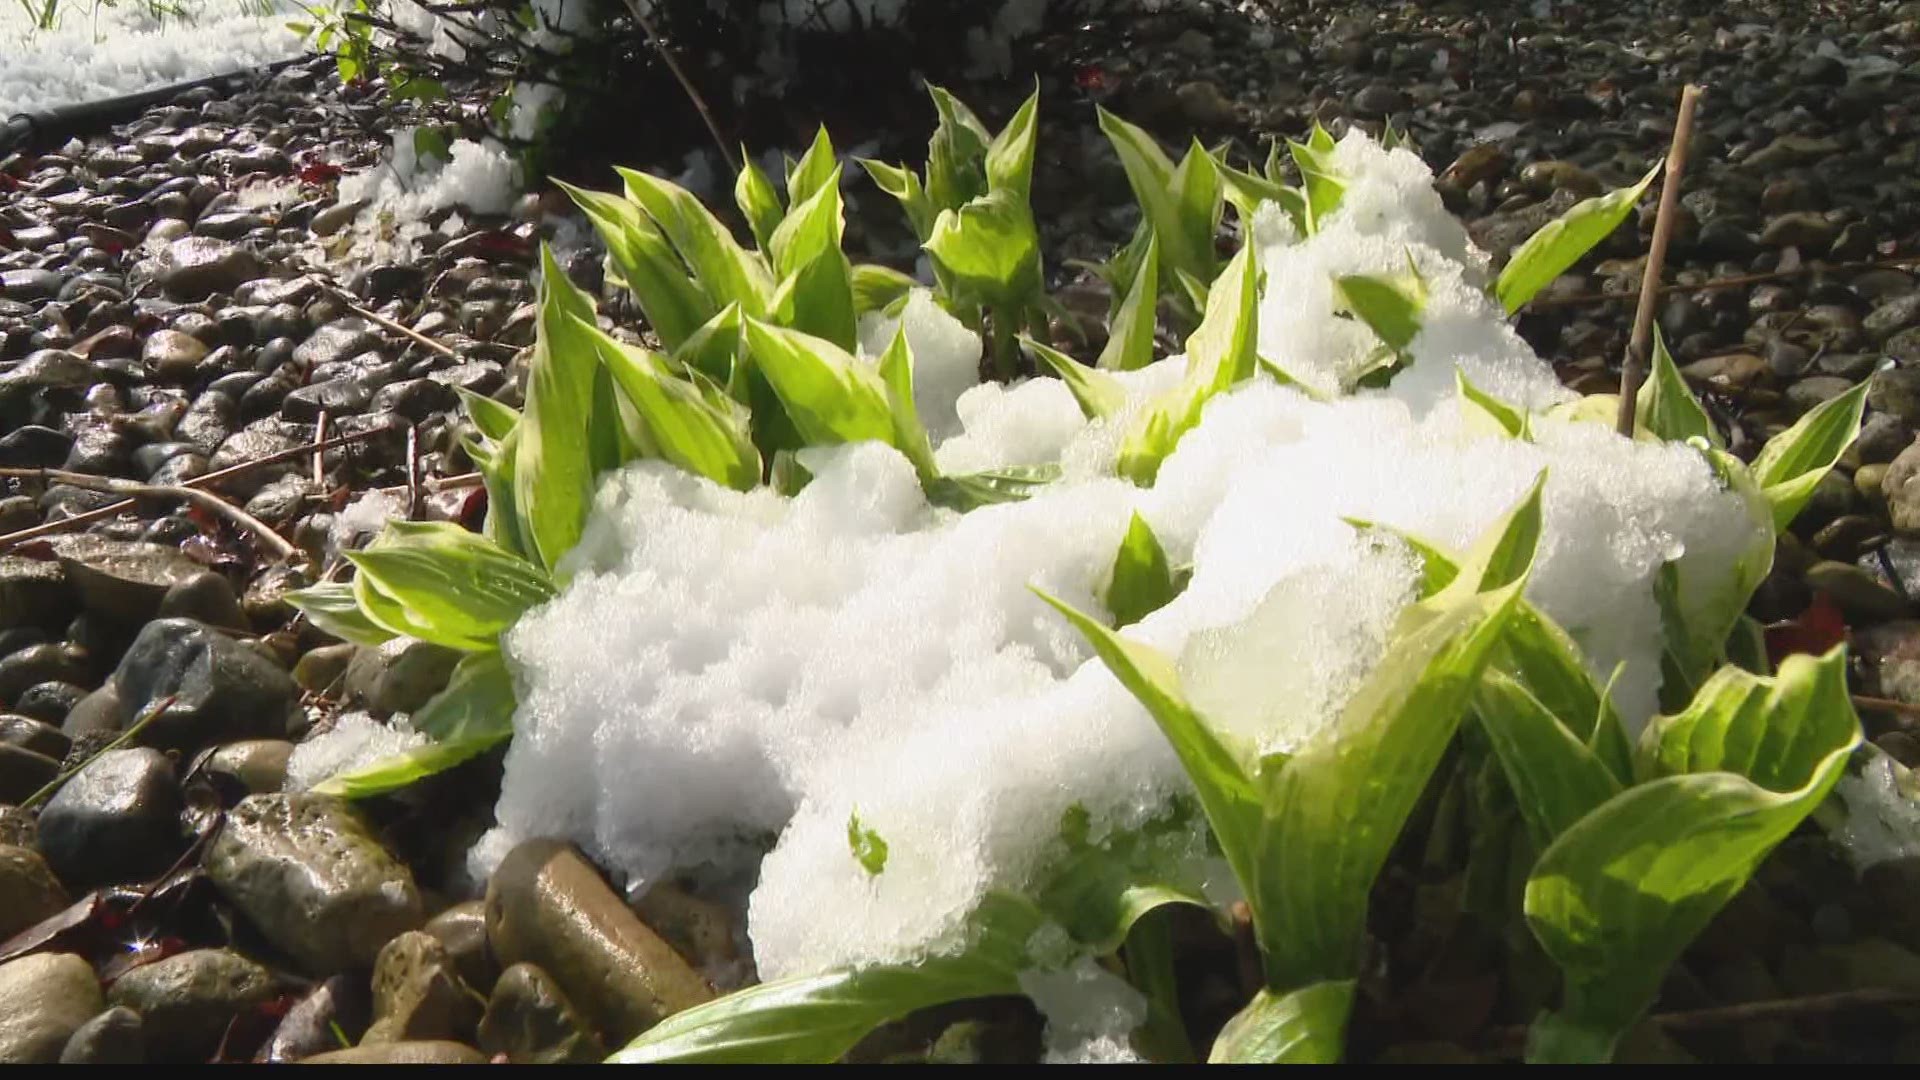 With snow and below-freezing temperatures, Pat Sullivan tells us what we can do to protect our plants from the cold.